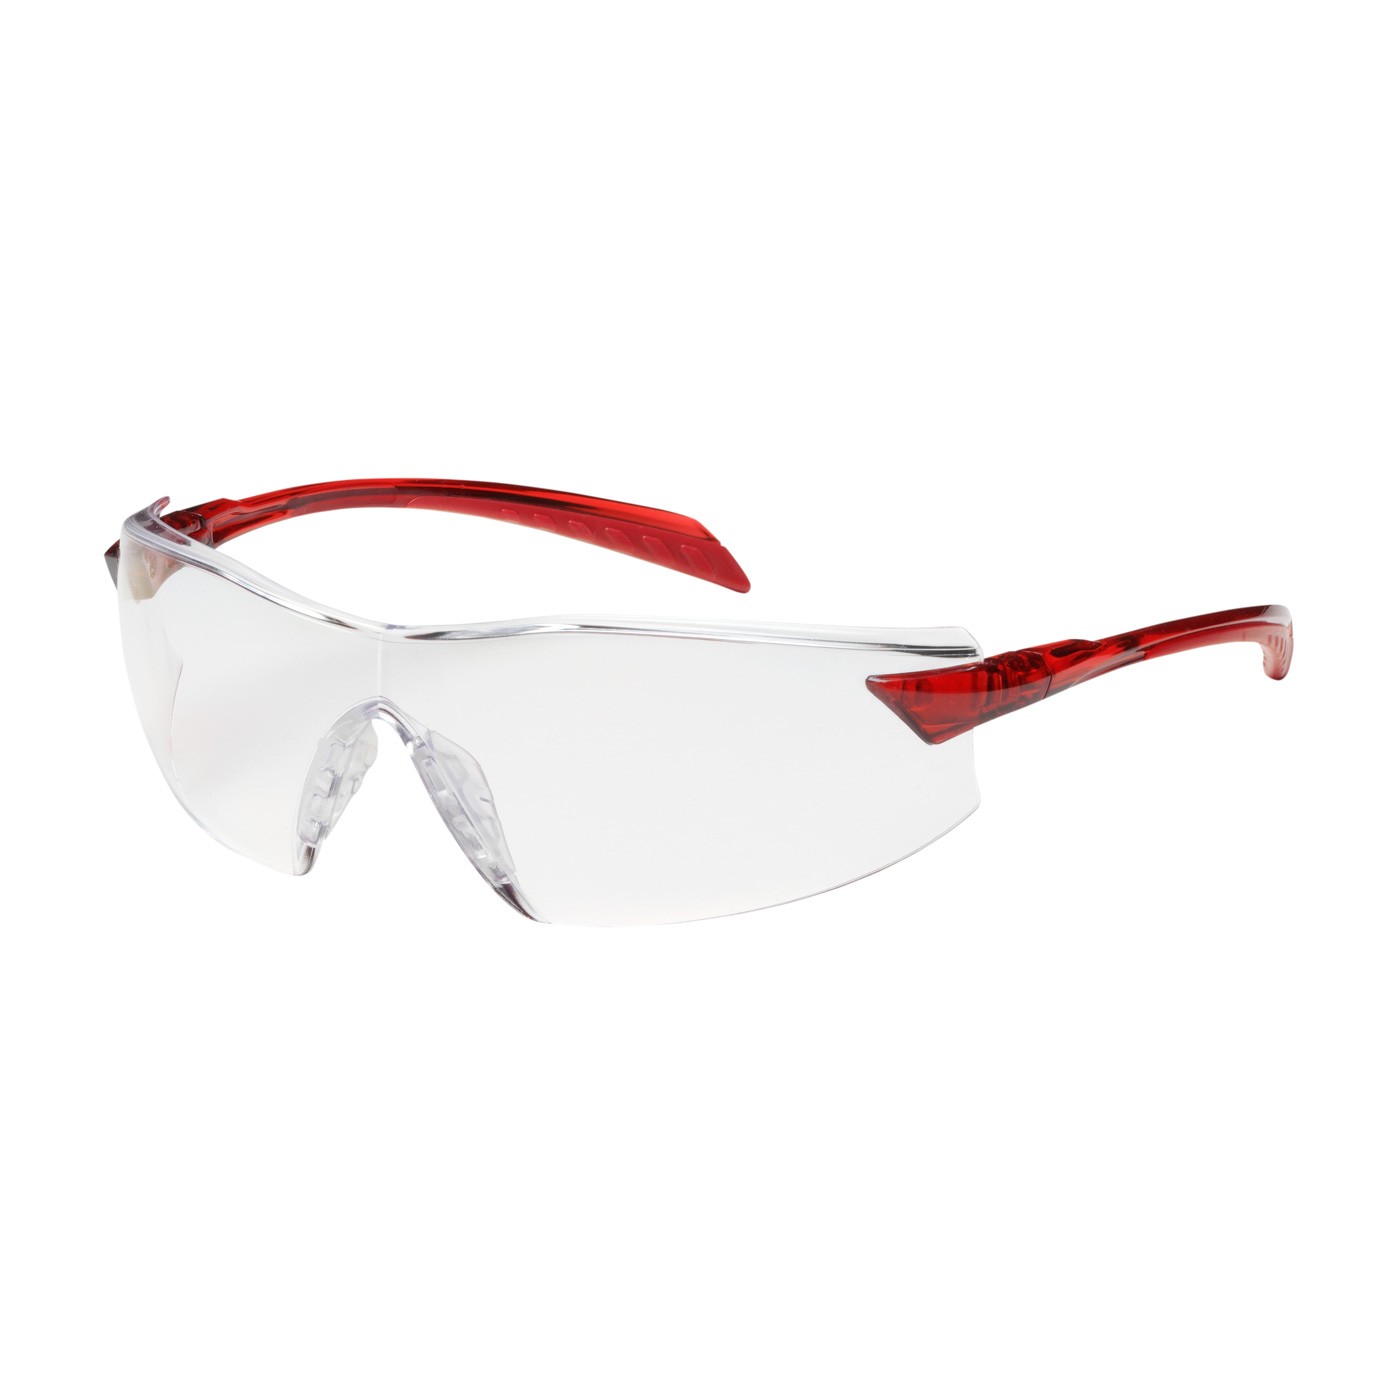 Radar™ Rimless Safety Glasses with Red Temple, Clear Lens and Anti-Scratch / Anti-Fog Coating  (#250-45-1020)